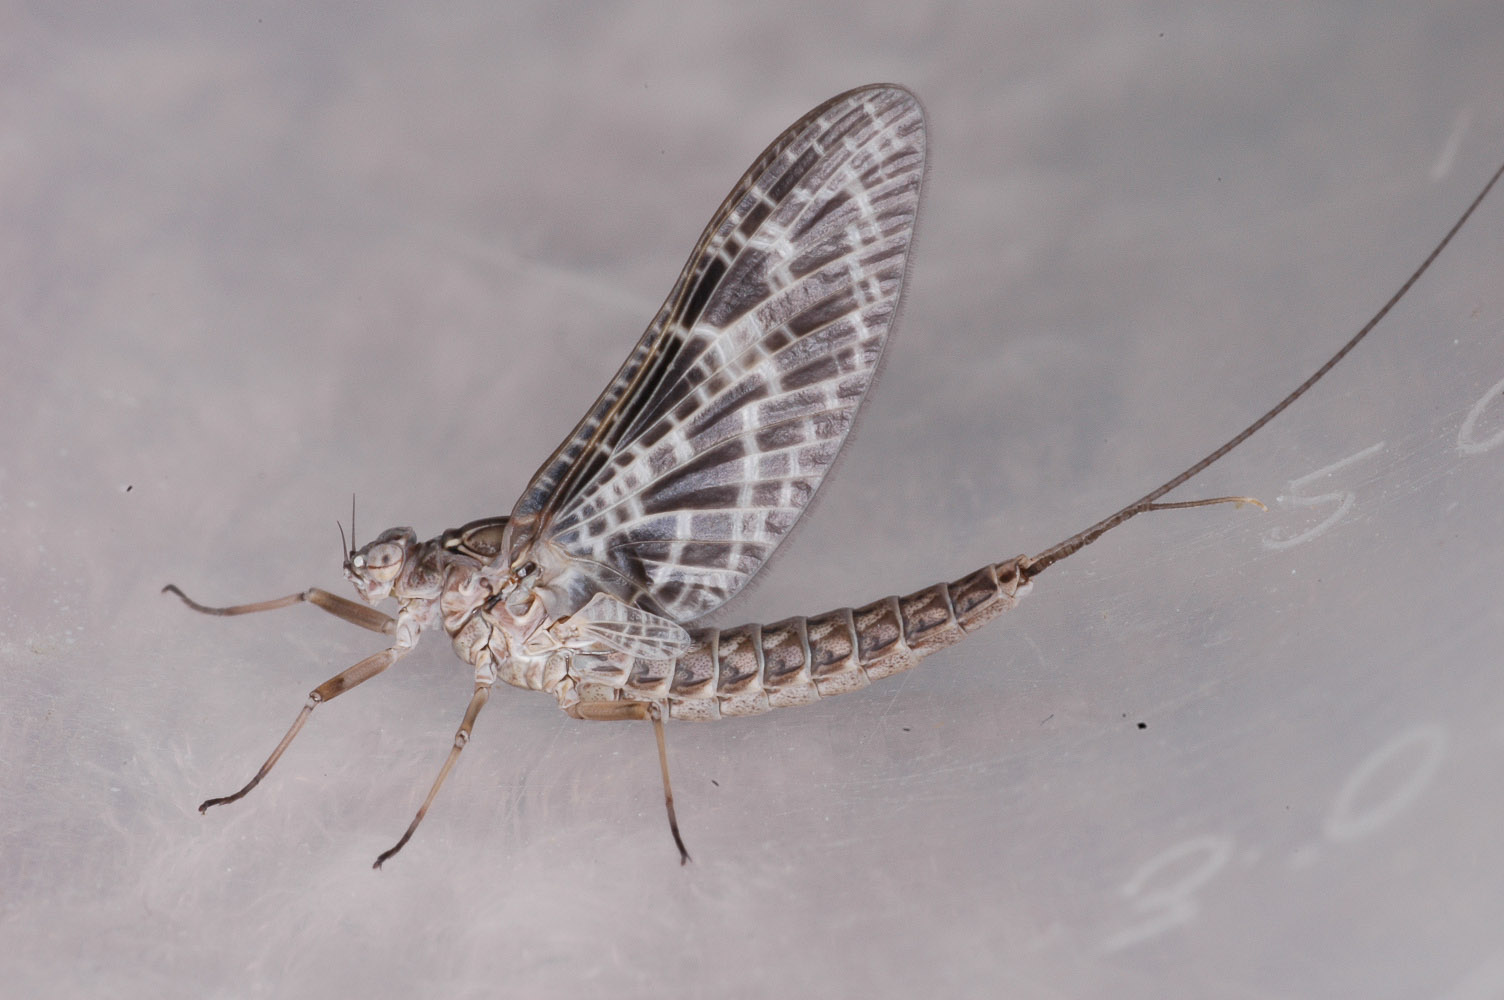 Female Callibaetis (Speckled Spinners) Mayfly Dun from Flathead Lake in Montana